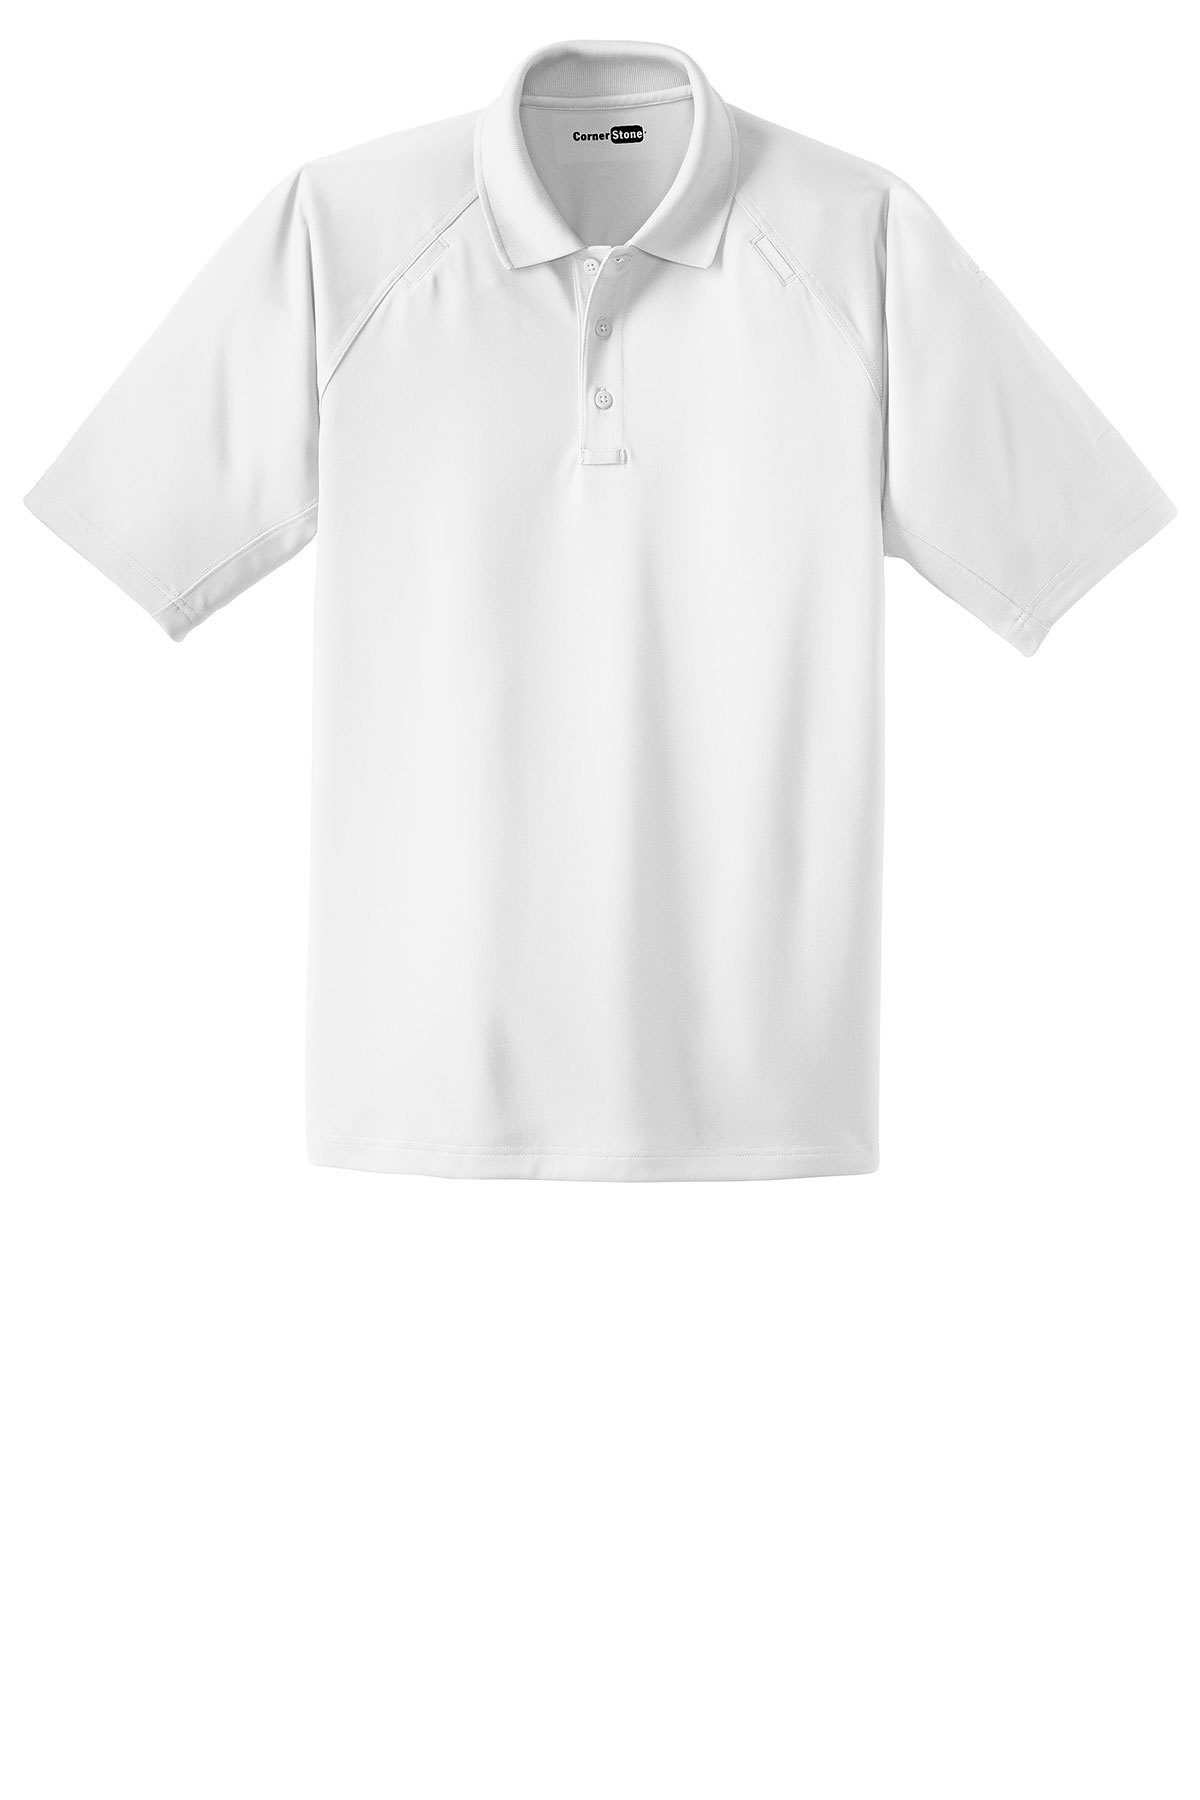 CornerStone - Select Snag-Proof Tactical Polo | Product | CornerStone